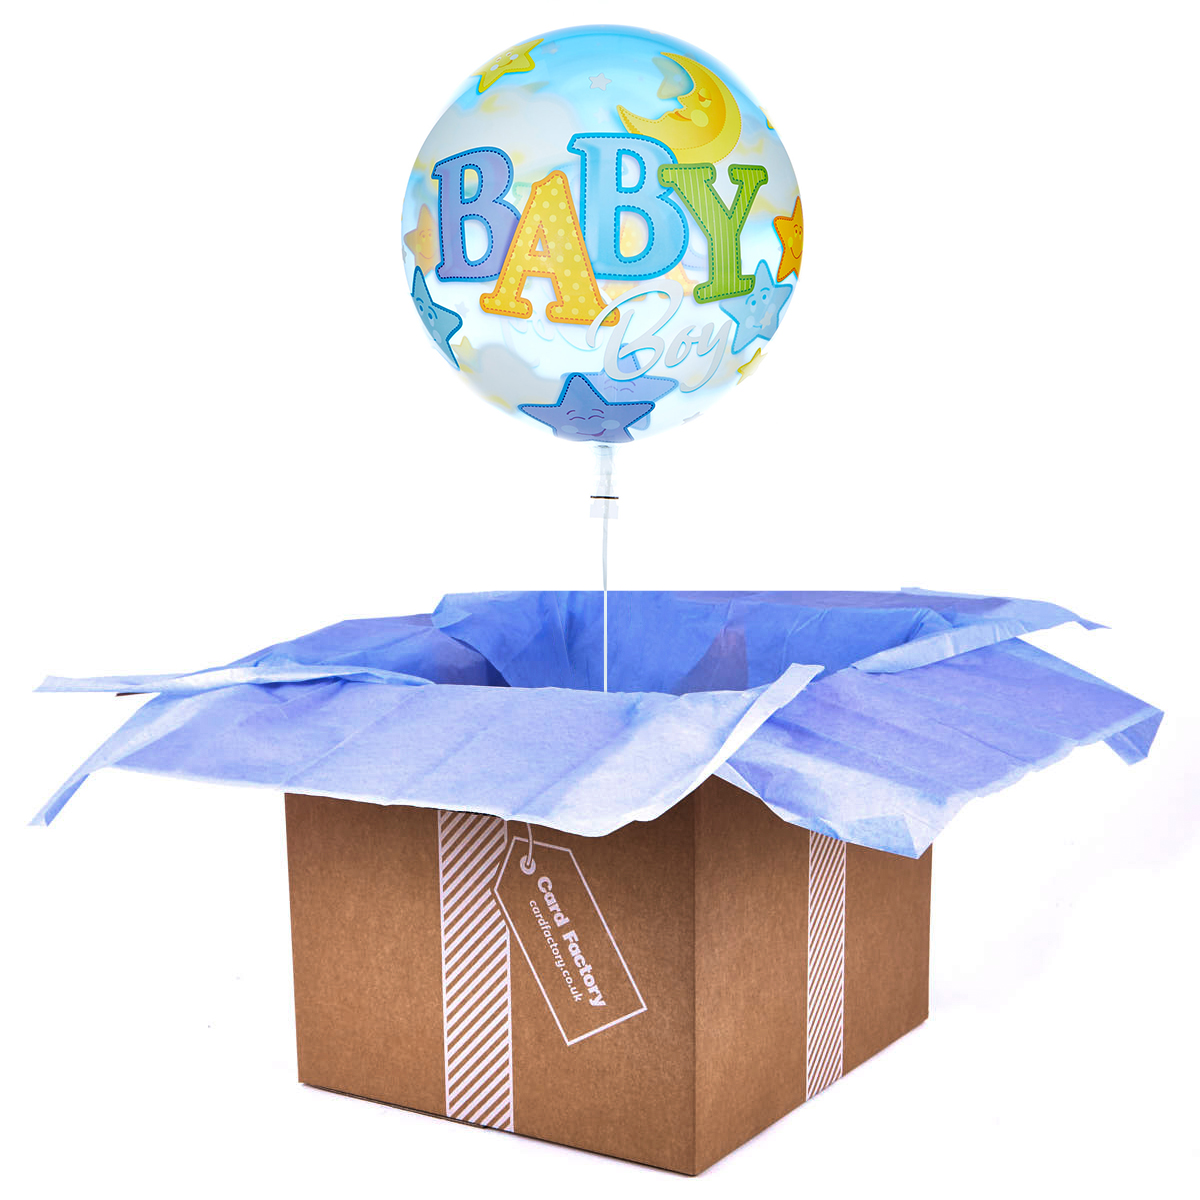 22-Inch Bubble Balloon - Baby Boy - DELIVERED INFLATED!